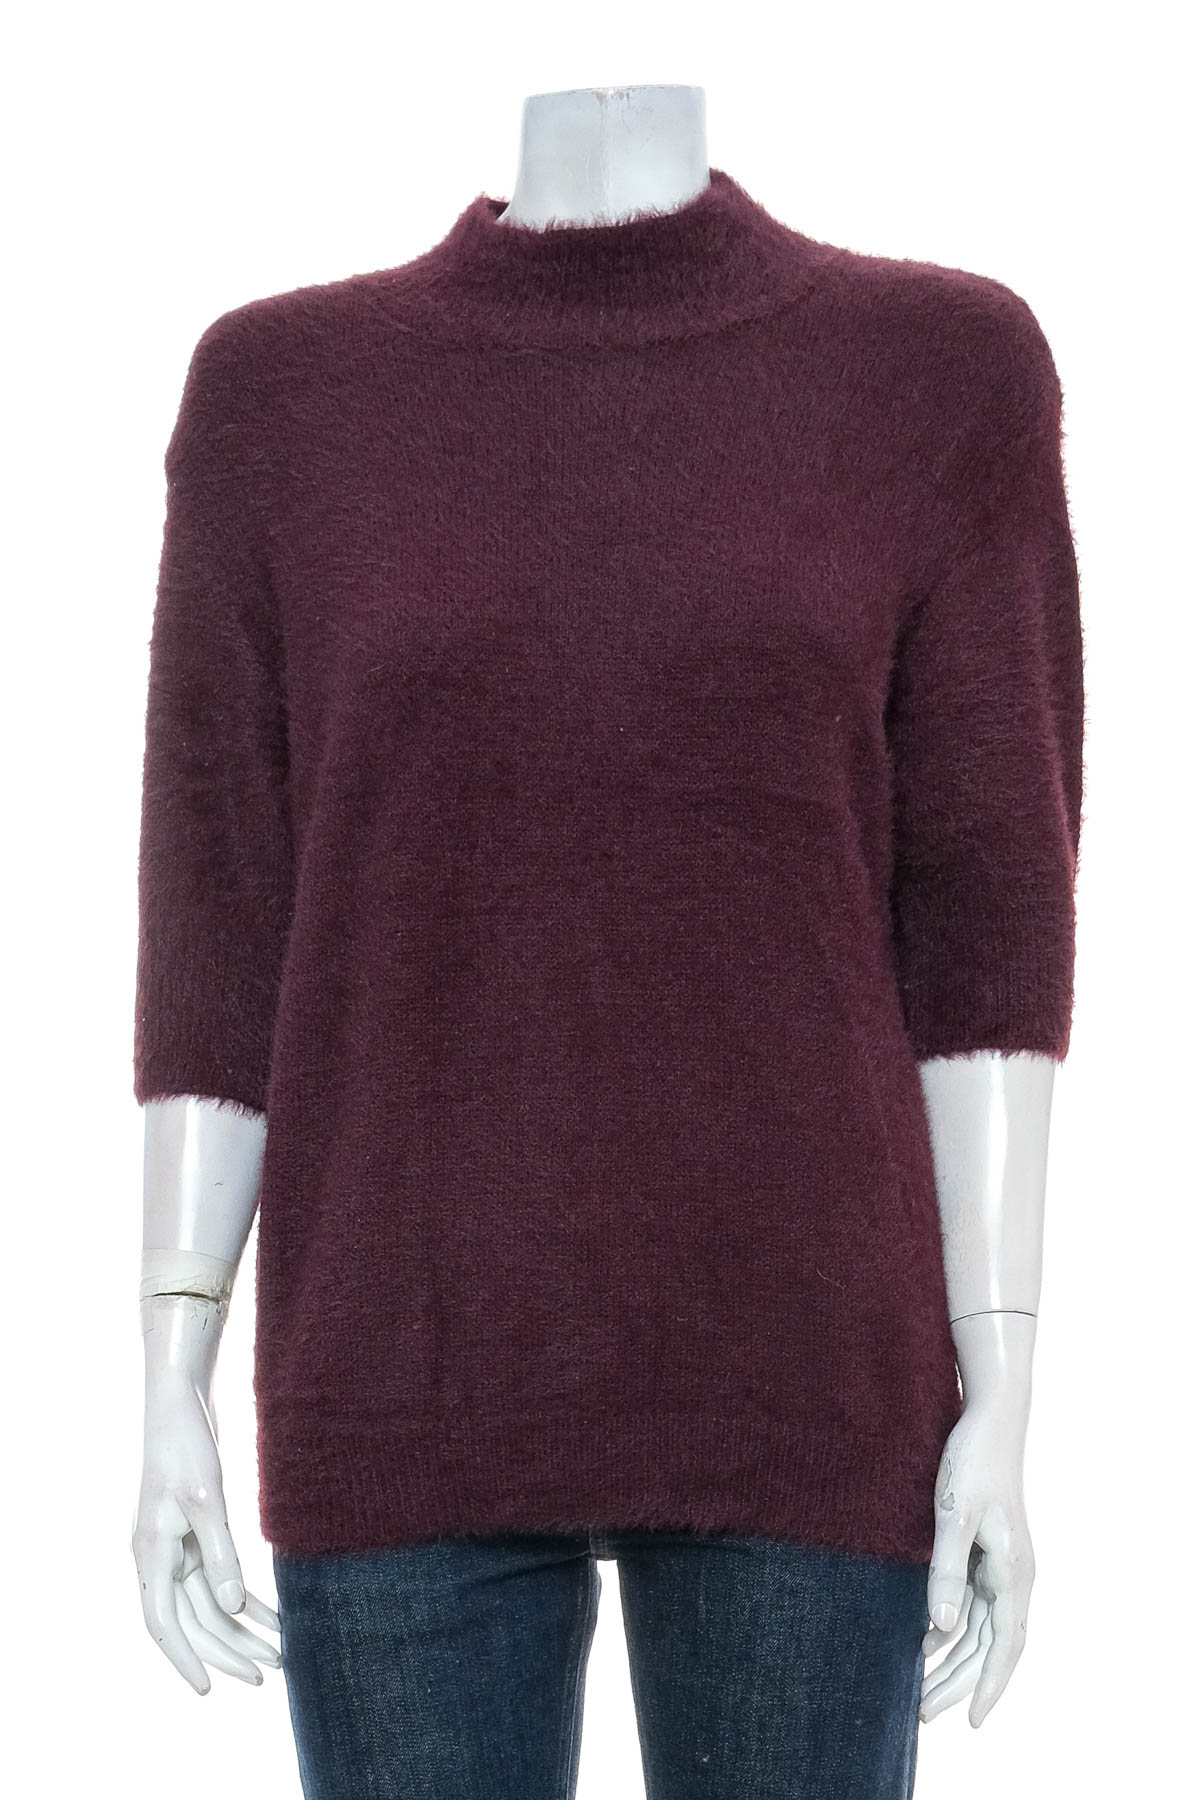 Women's sweater - Marled BY REUNITED CLOTHING - 0